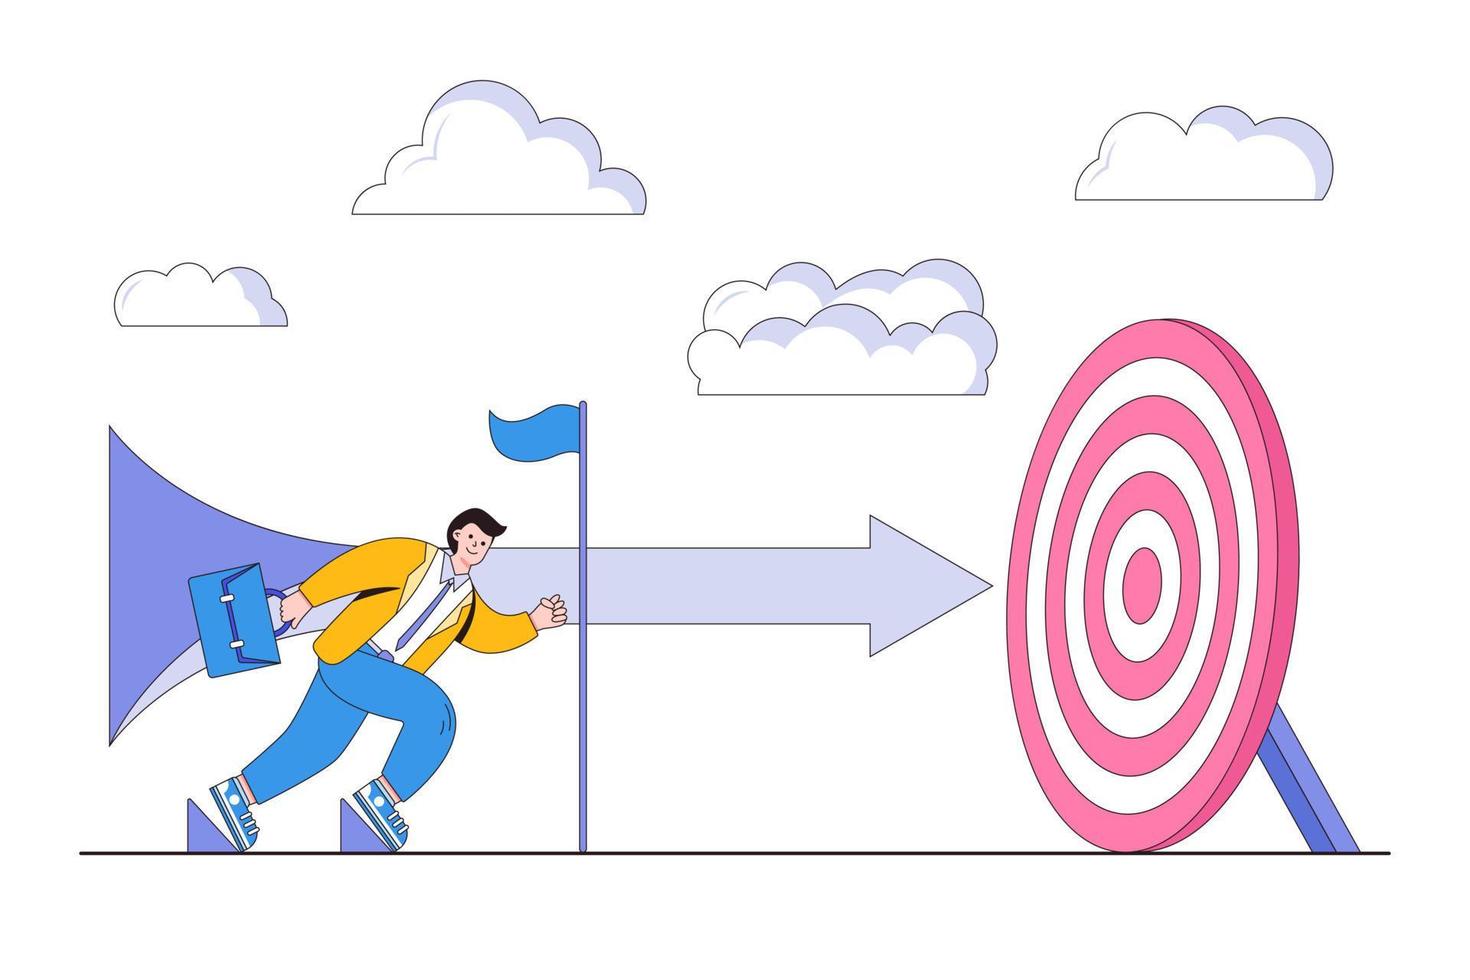 Focus and willingness for starting business, begin new job, or preparing for work concepts illustrations. Businessman get sprint run on start position with arrow going to goal and target vector